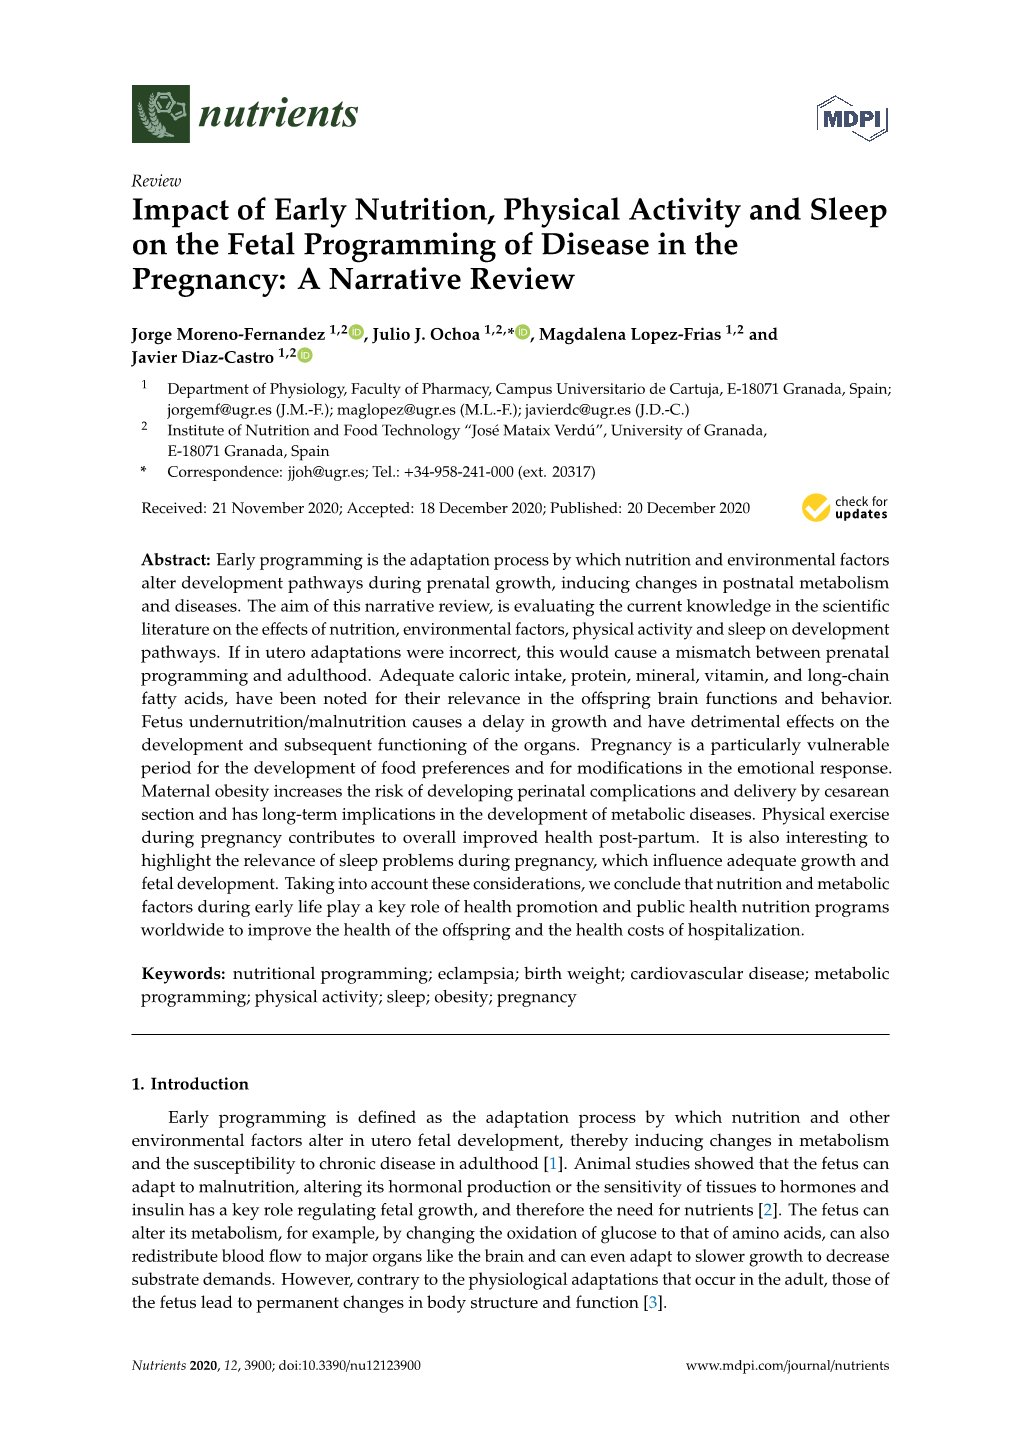 Impact of Early Nutrition, Physical Activity and Sleep on the Fetal Programming of Disease in the Pregnancy: a Narrative Review